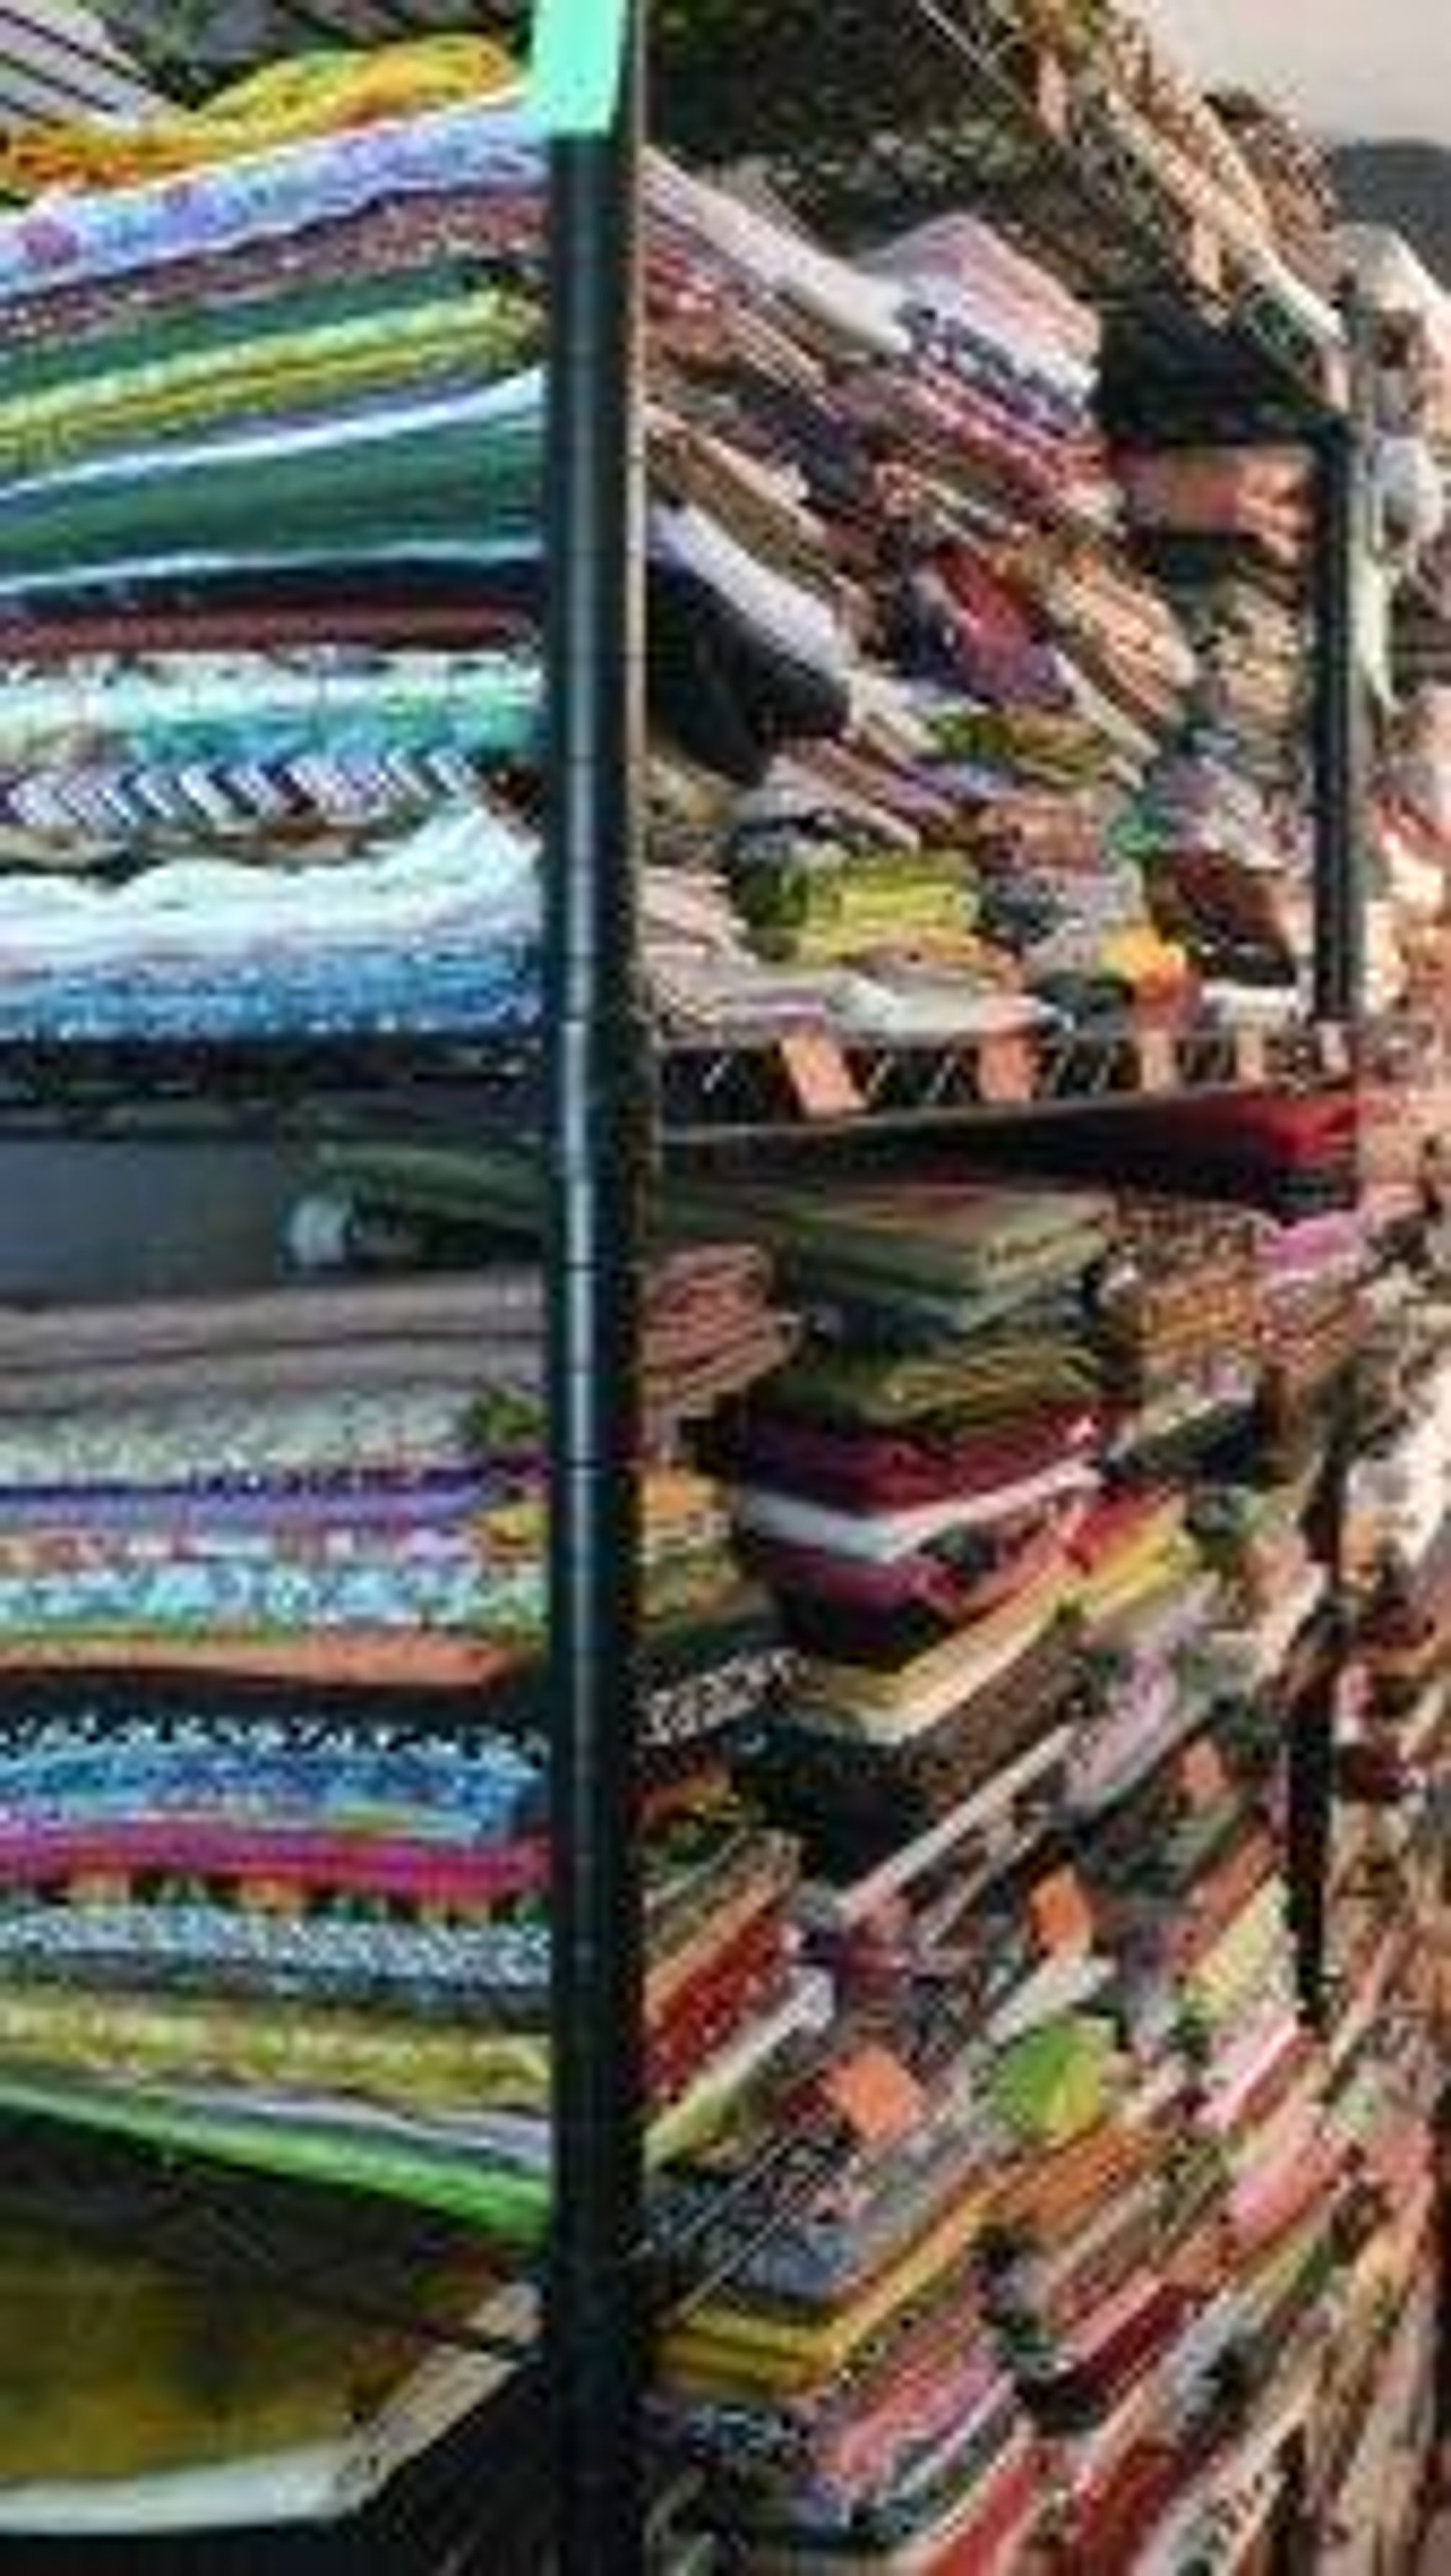 A shelf full of stacks and stacks of fabric.